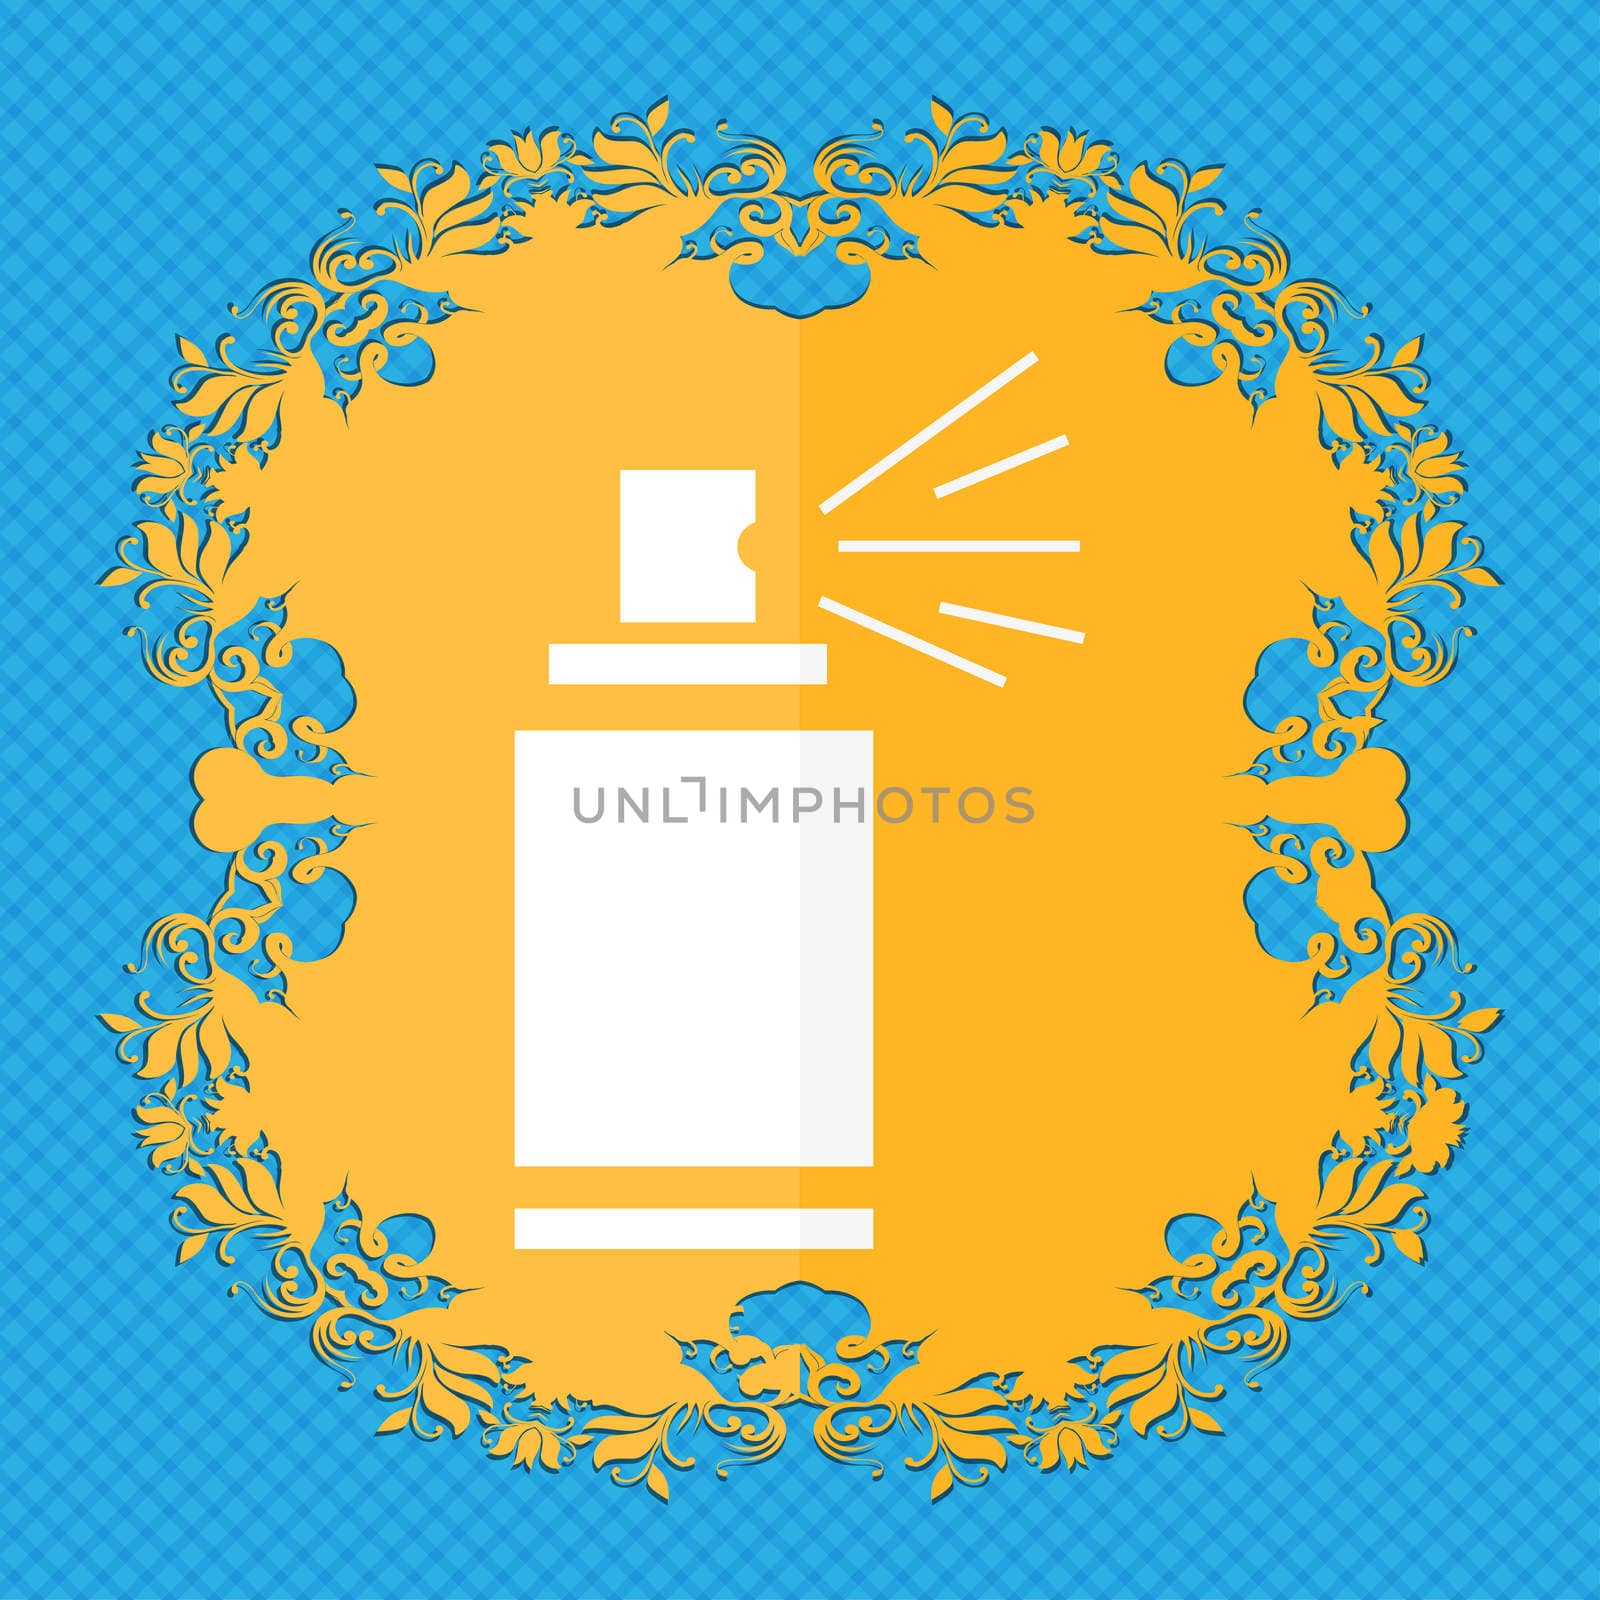 Graffiti spray can sign icon. Aerosol paint symbol. Floral flat design on a blue abstract background with place for your text. illustration